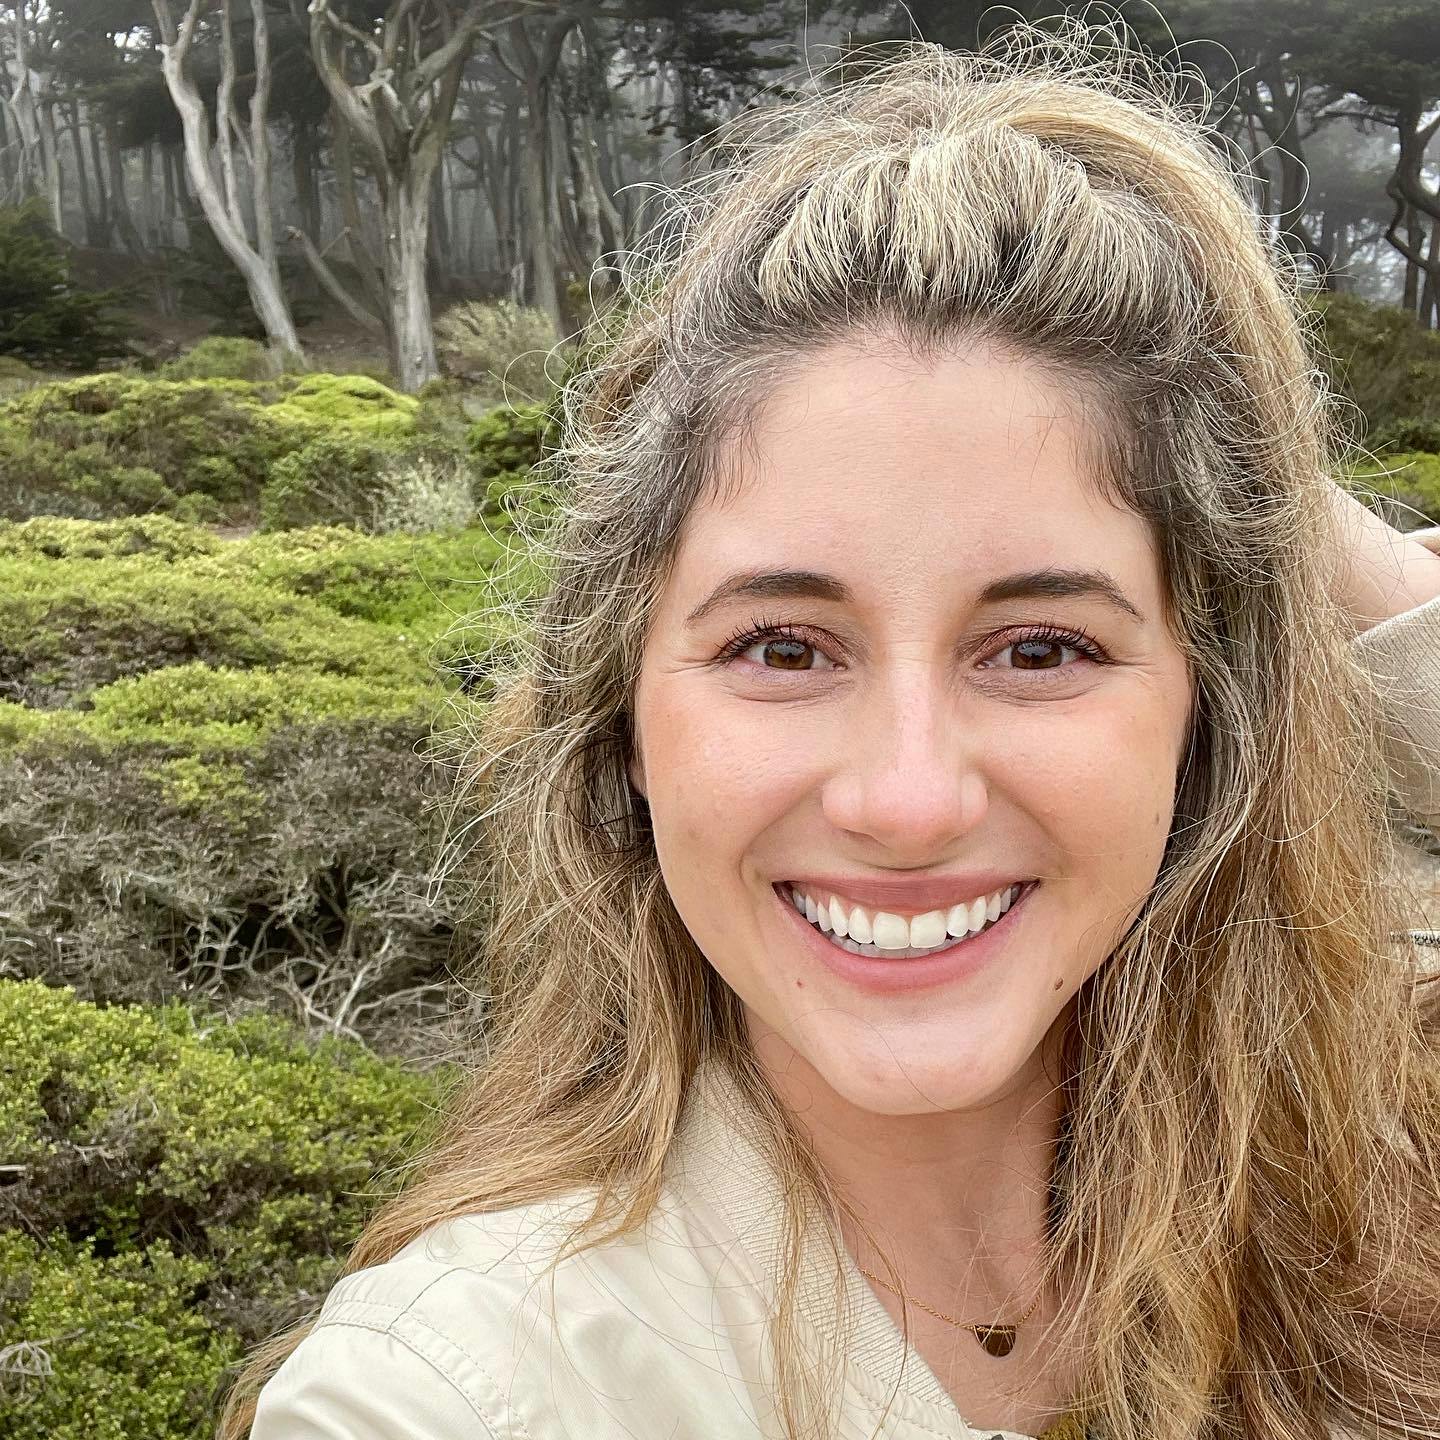 Profile photo of Courtney Brown, wearing a light yellow shirt, standing in front of a mossy landscape